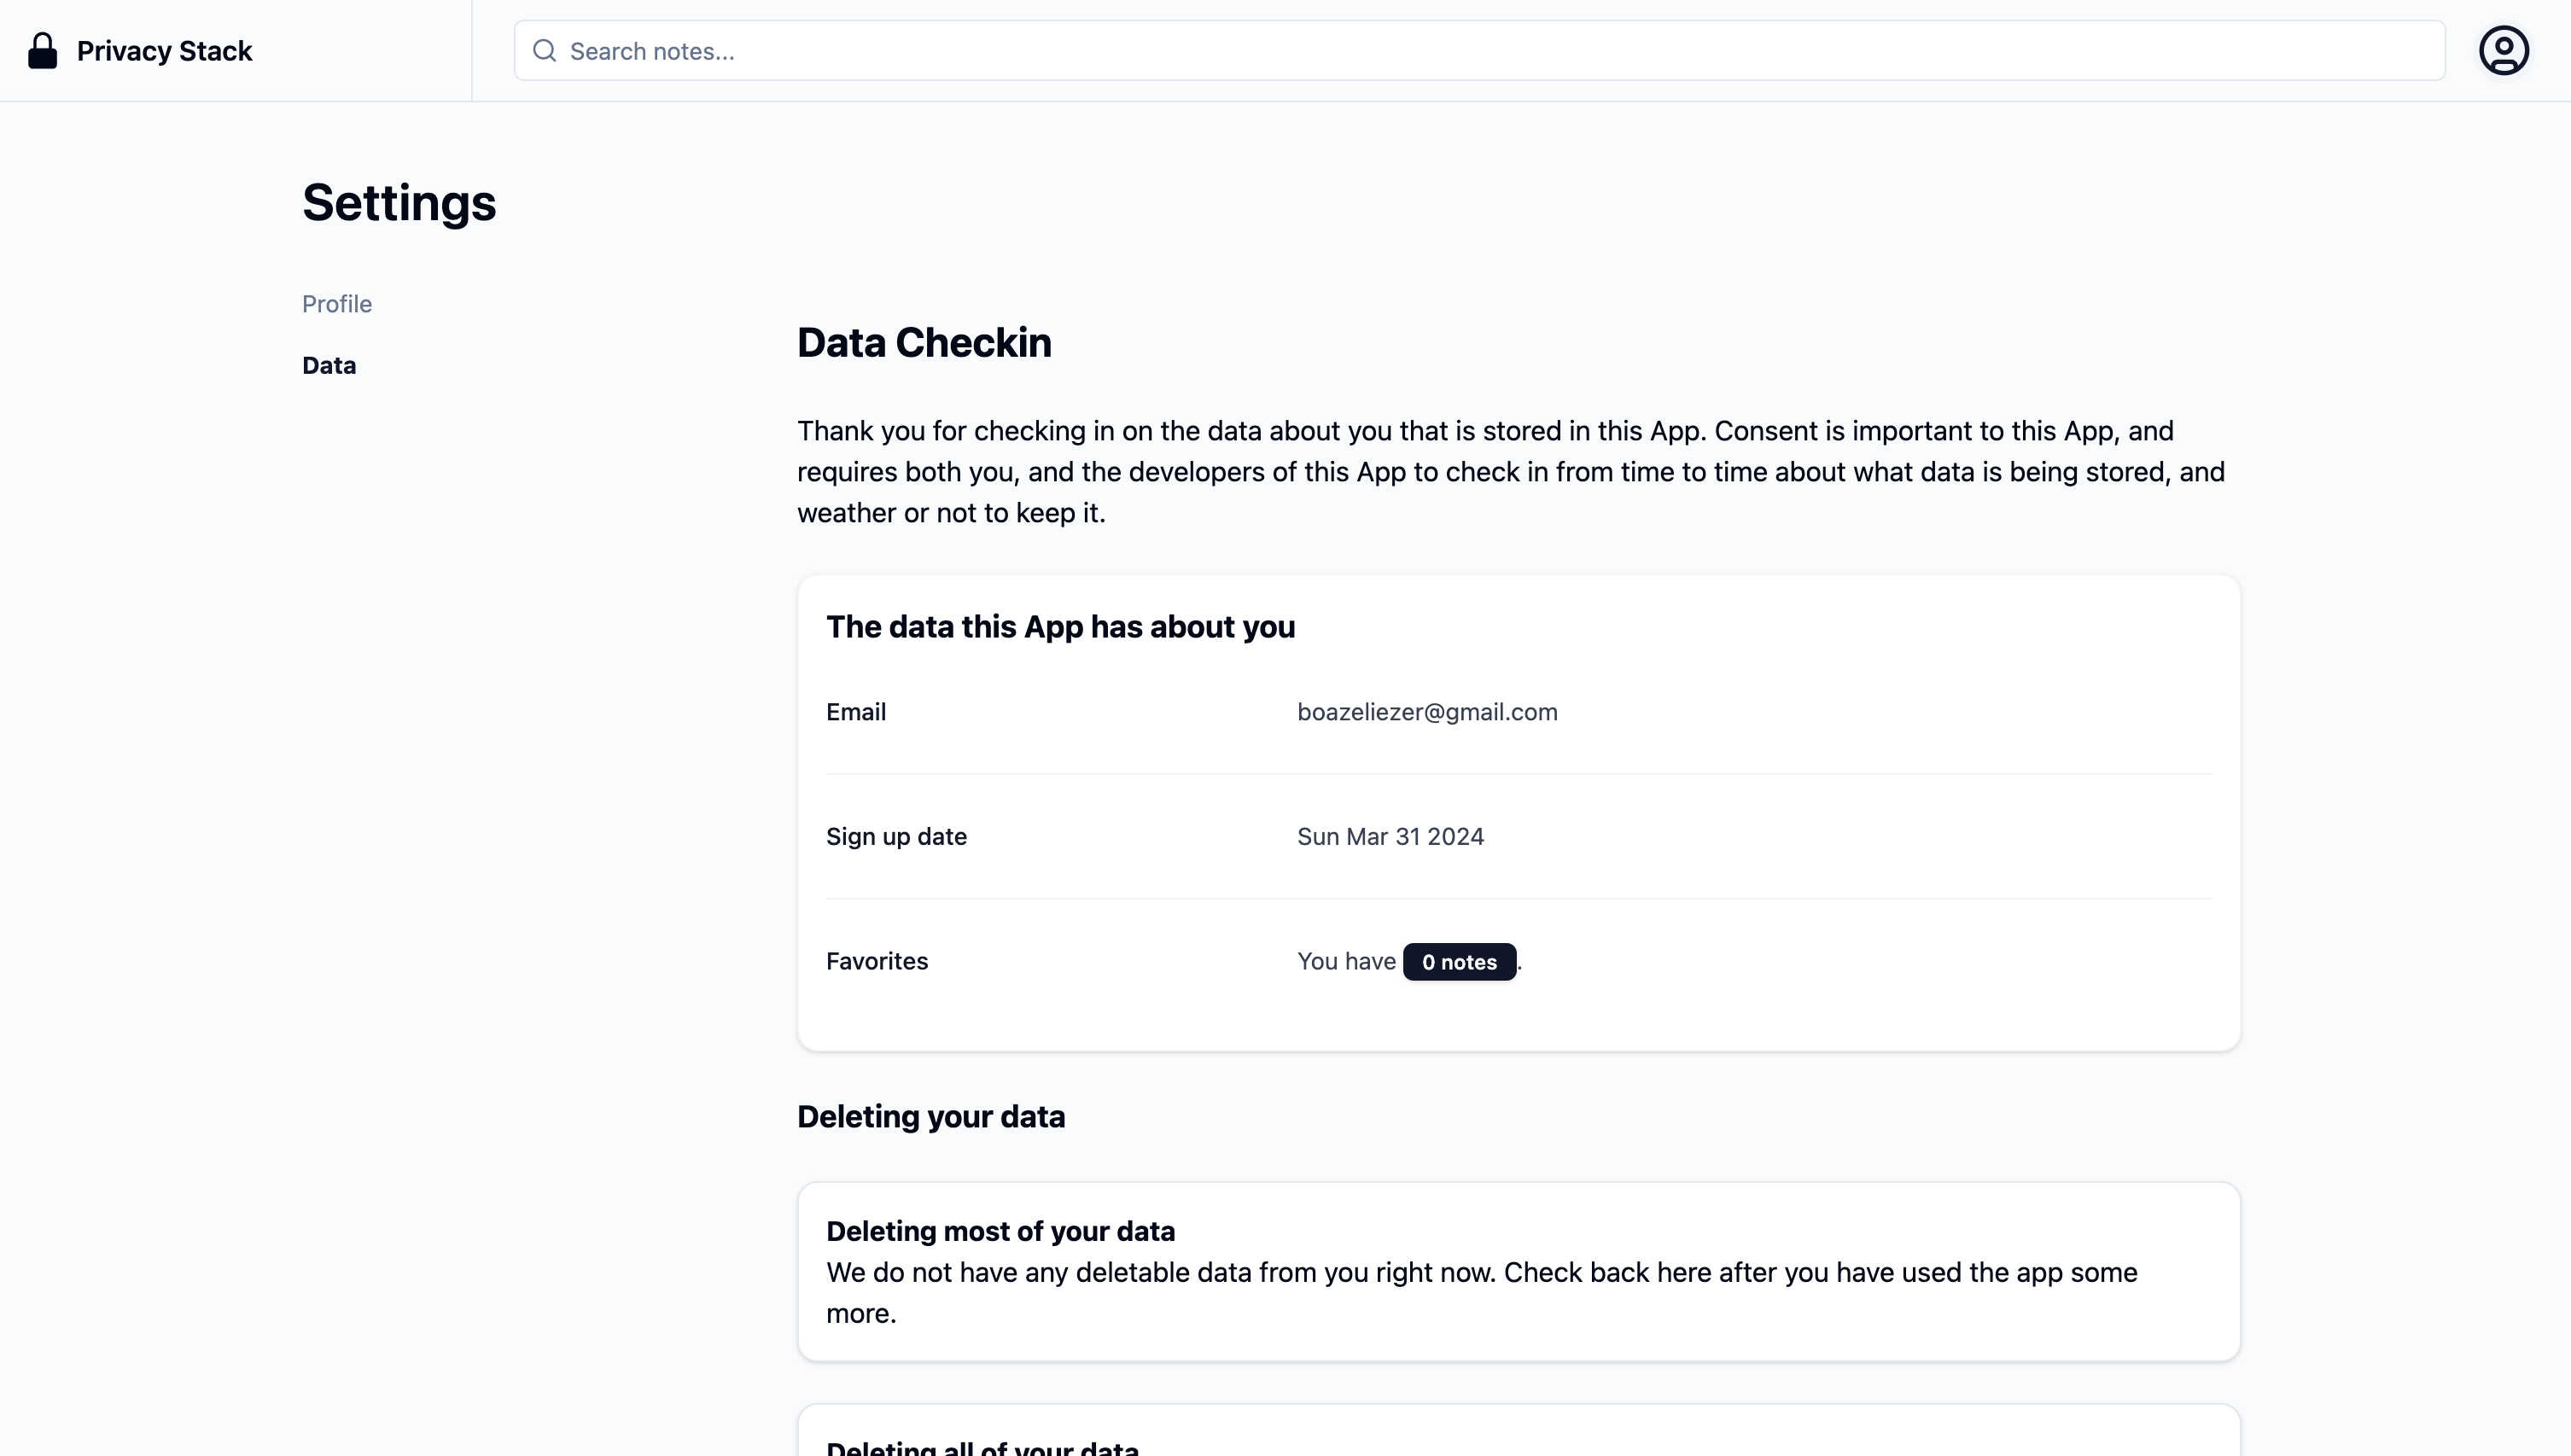 Screenshot of the data setting page in the privacy stack's demo app